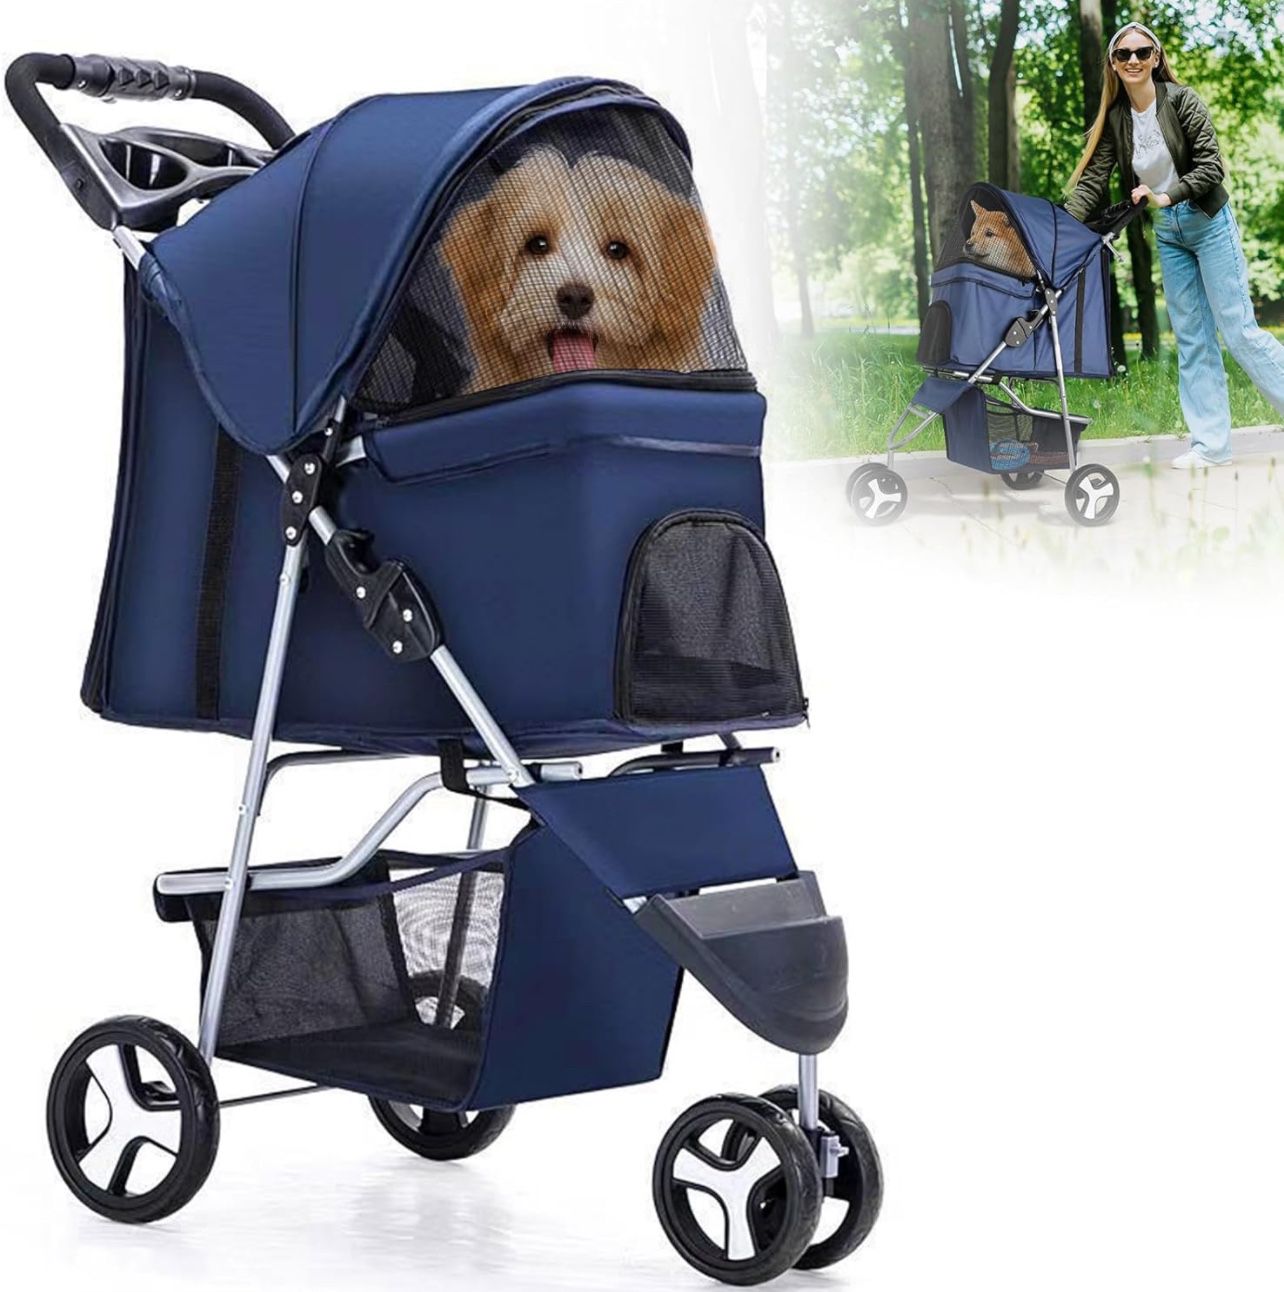 Pet Stroller Dog Cat Foldable Stroller 3 Wheels Carrier Strolling Cart for Medium Small Dogs Cats with Waterproof Oxford Cup Holder & Removable Liner 